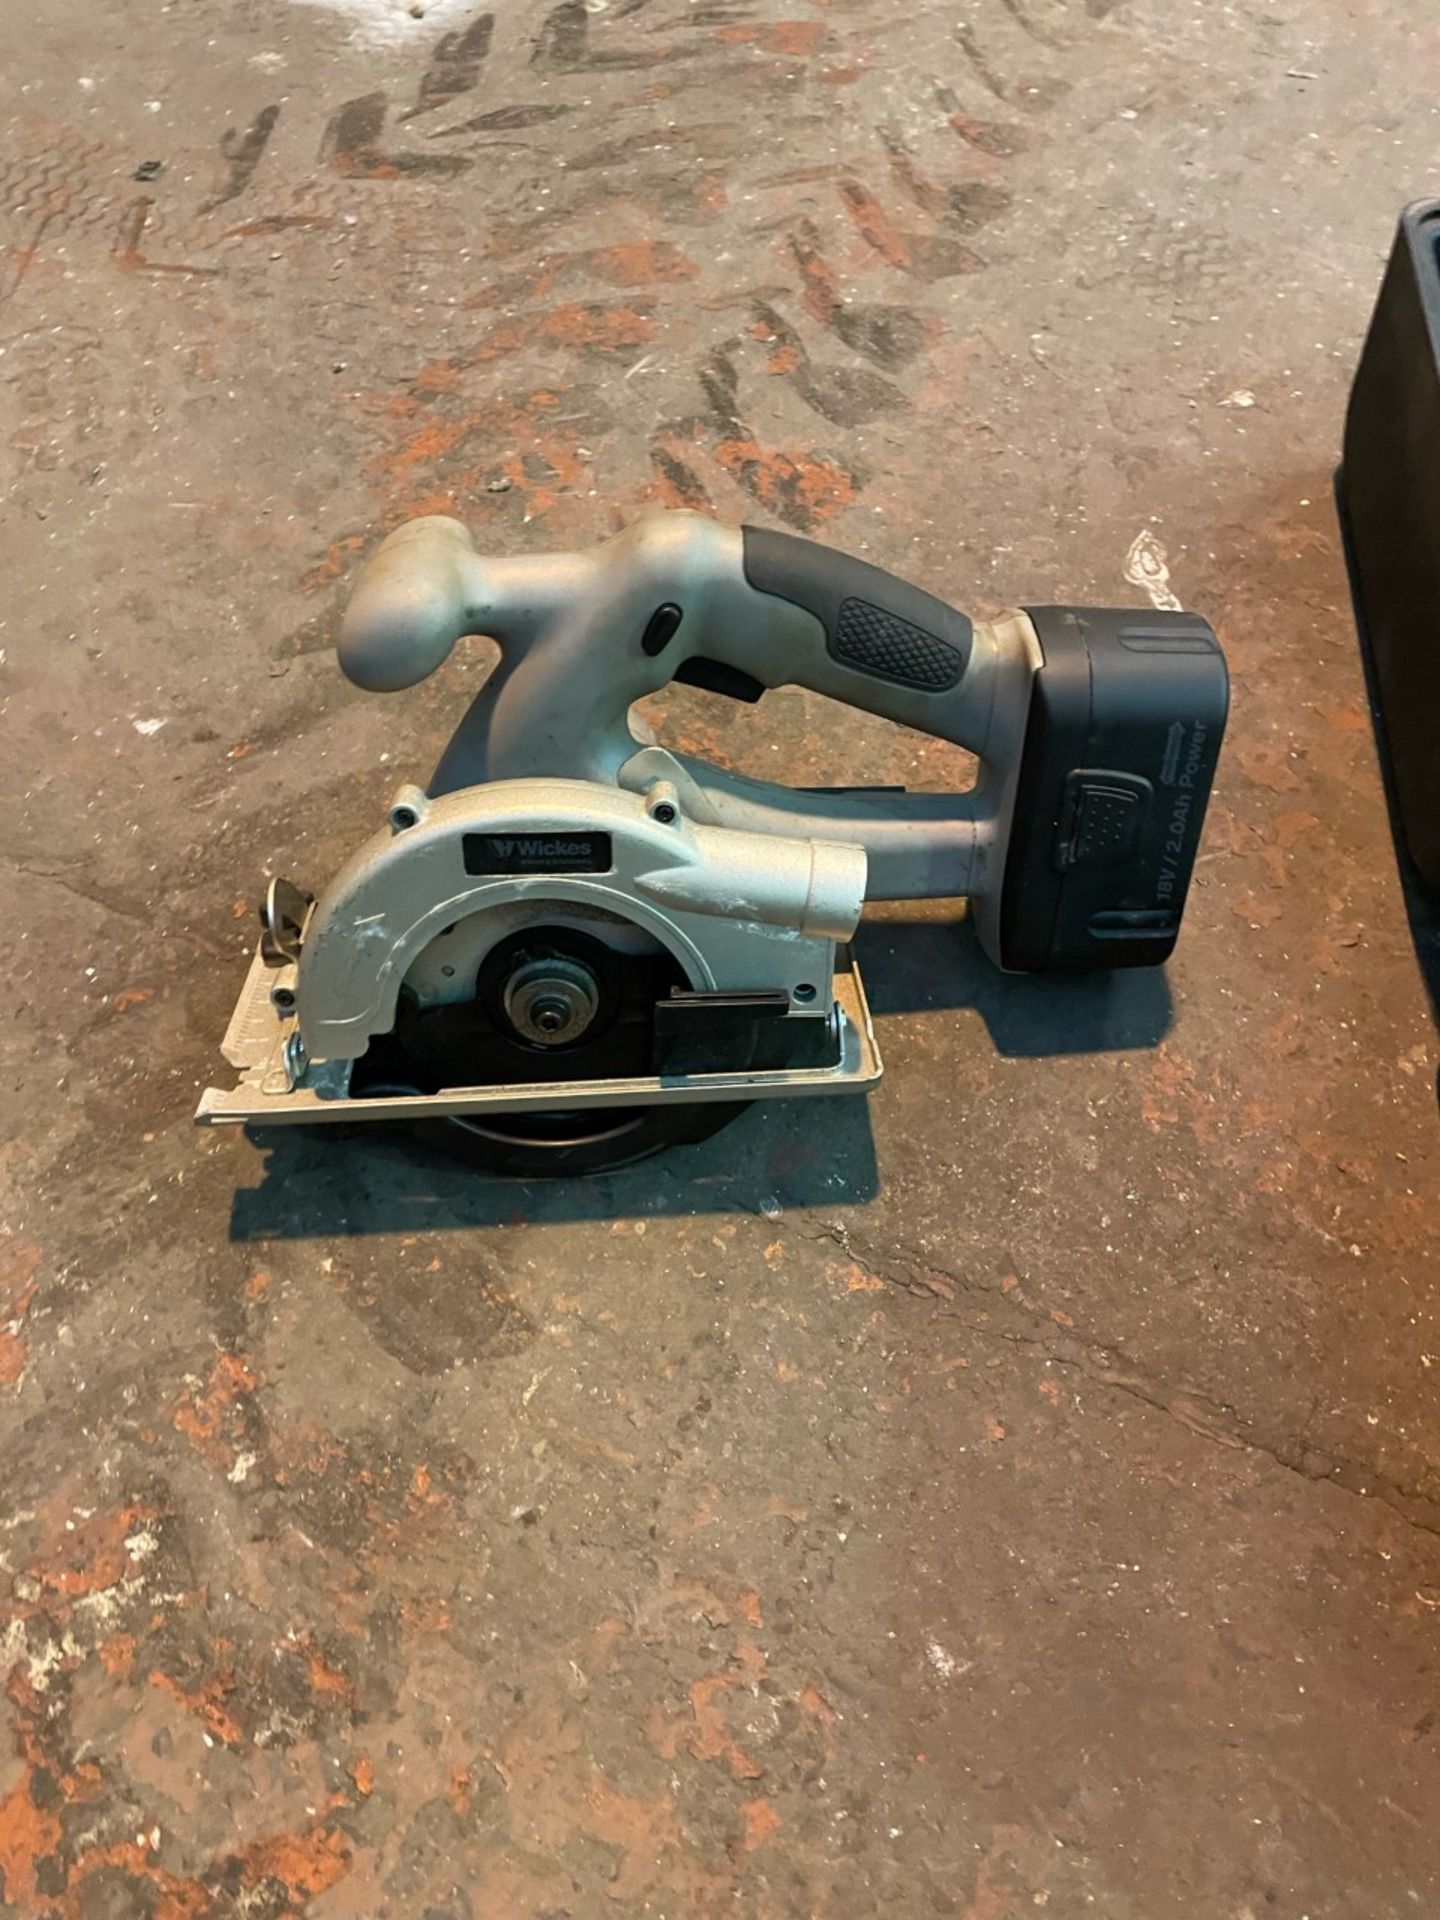 18v battery circular saw. In box working order